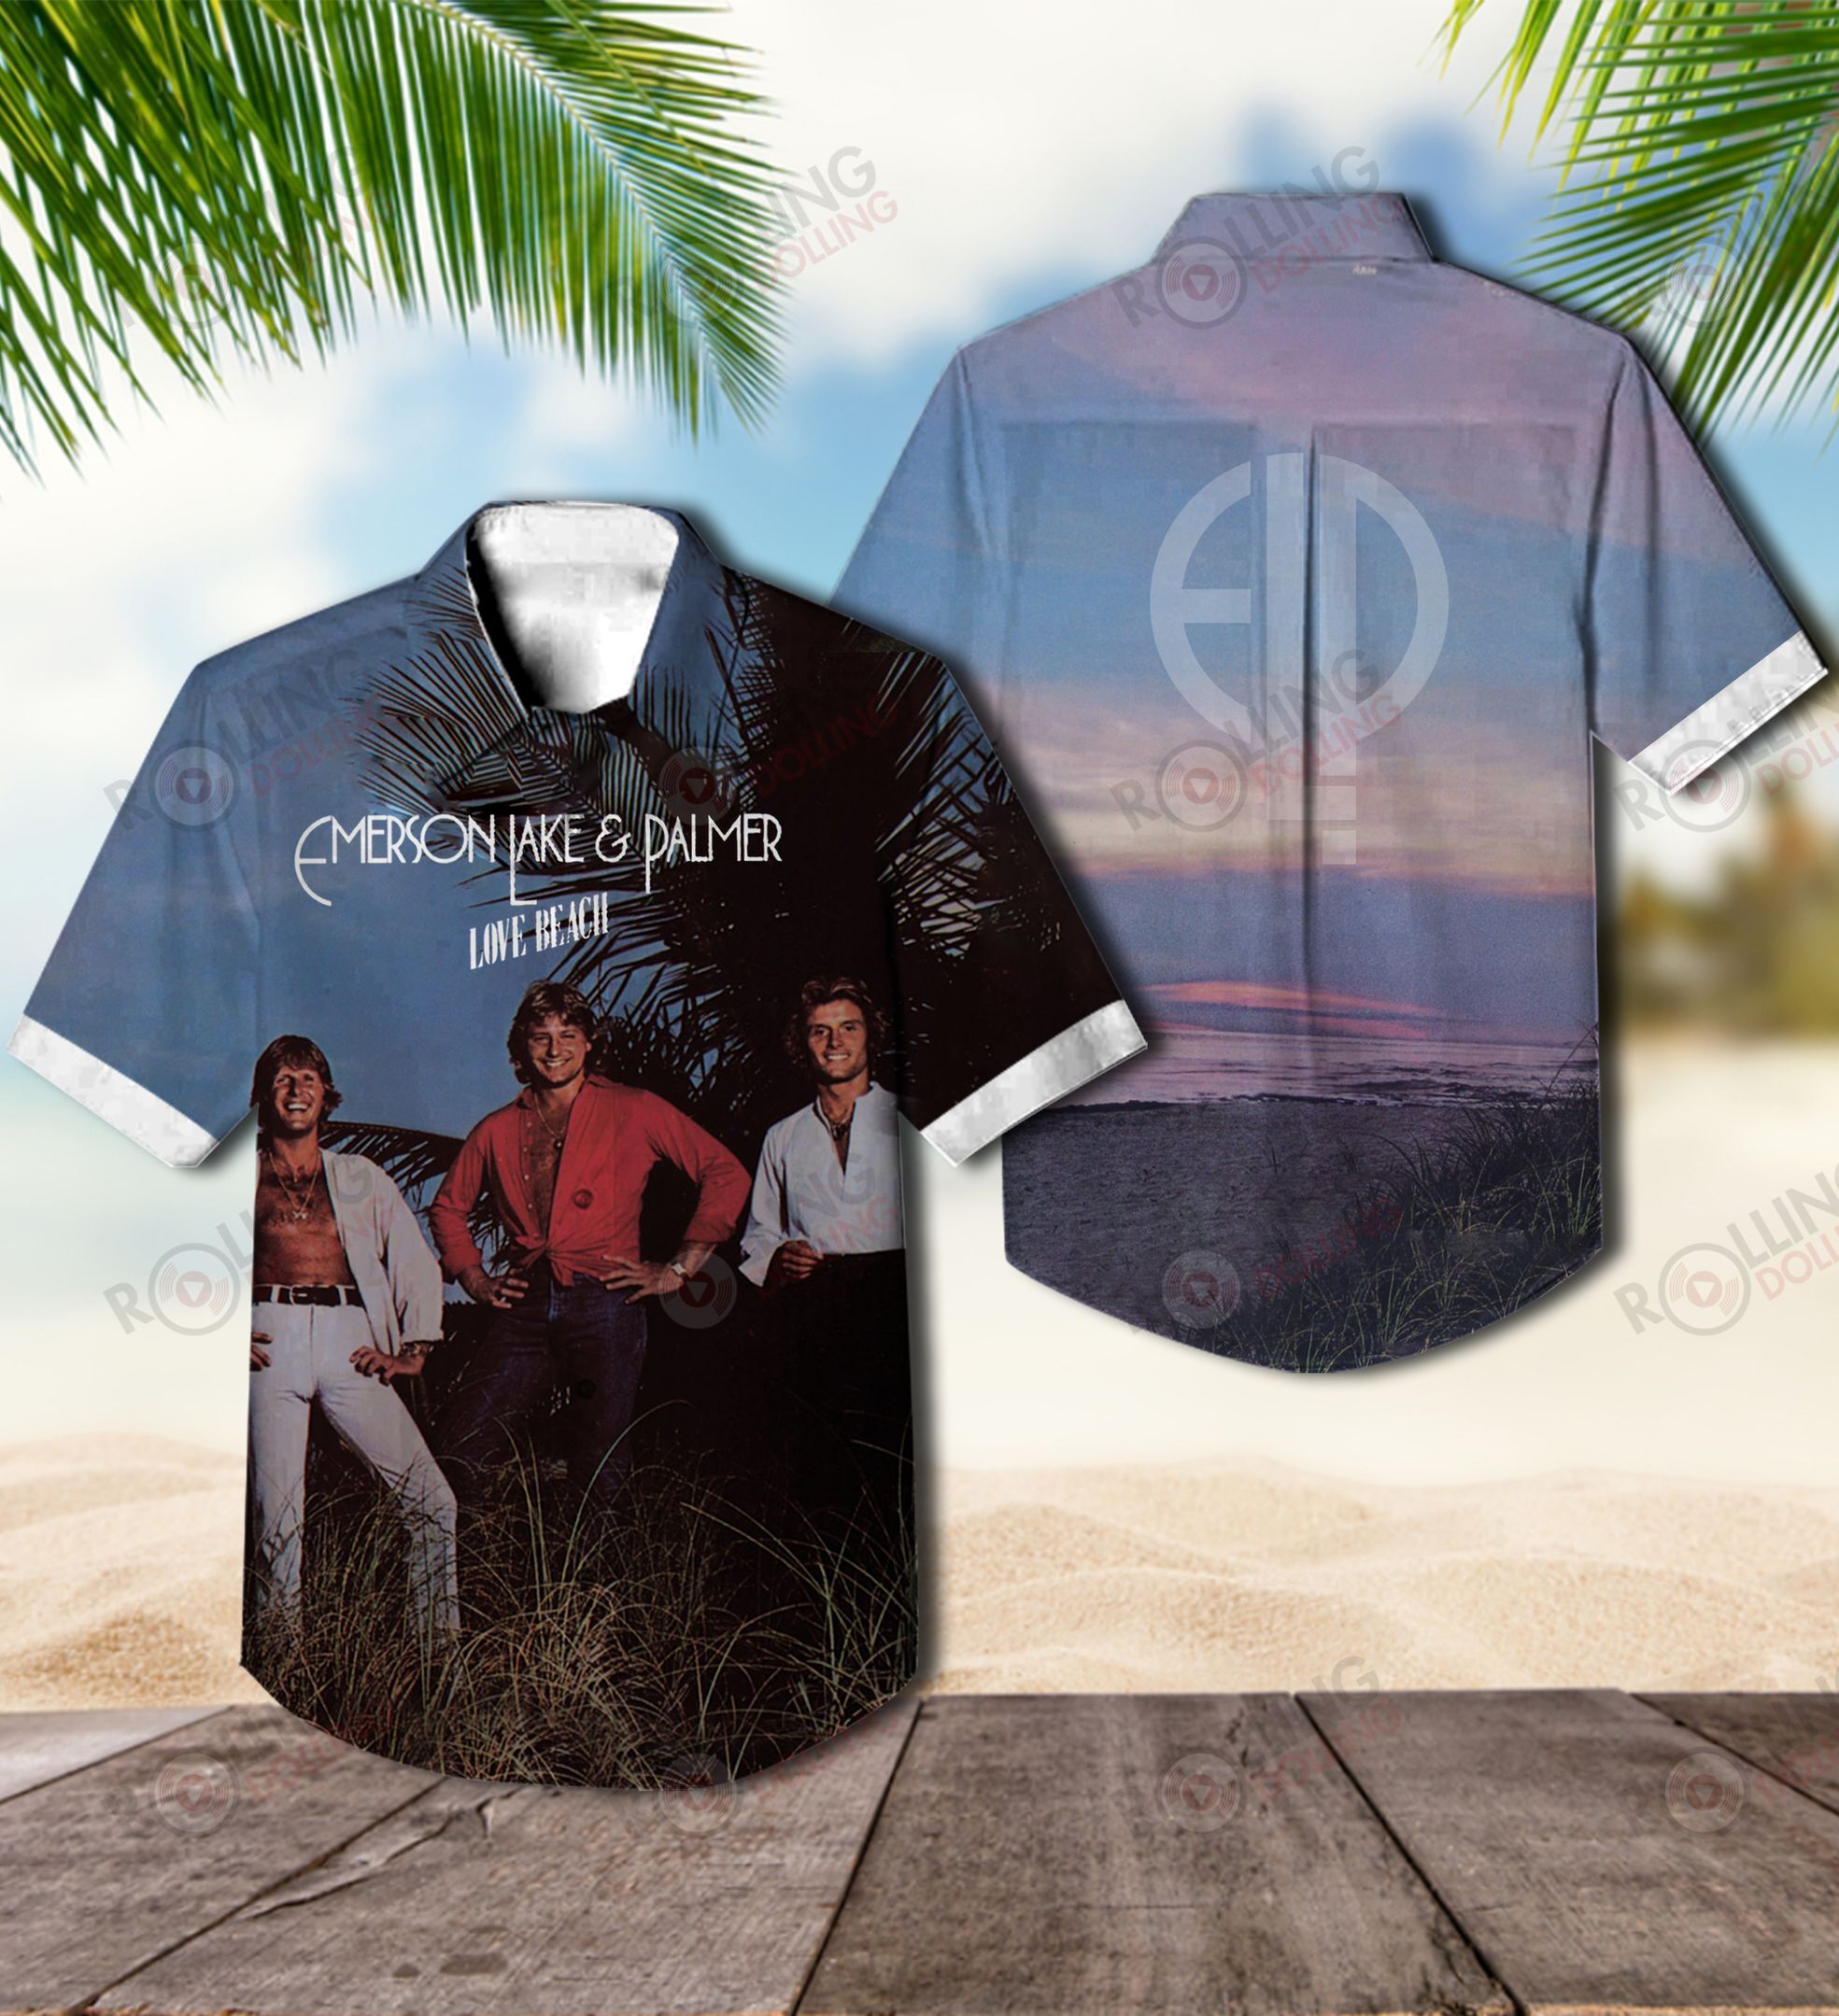 Now you can show off your love of all things band with this Hawaiian Shirt 139